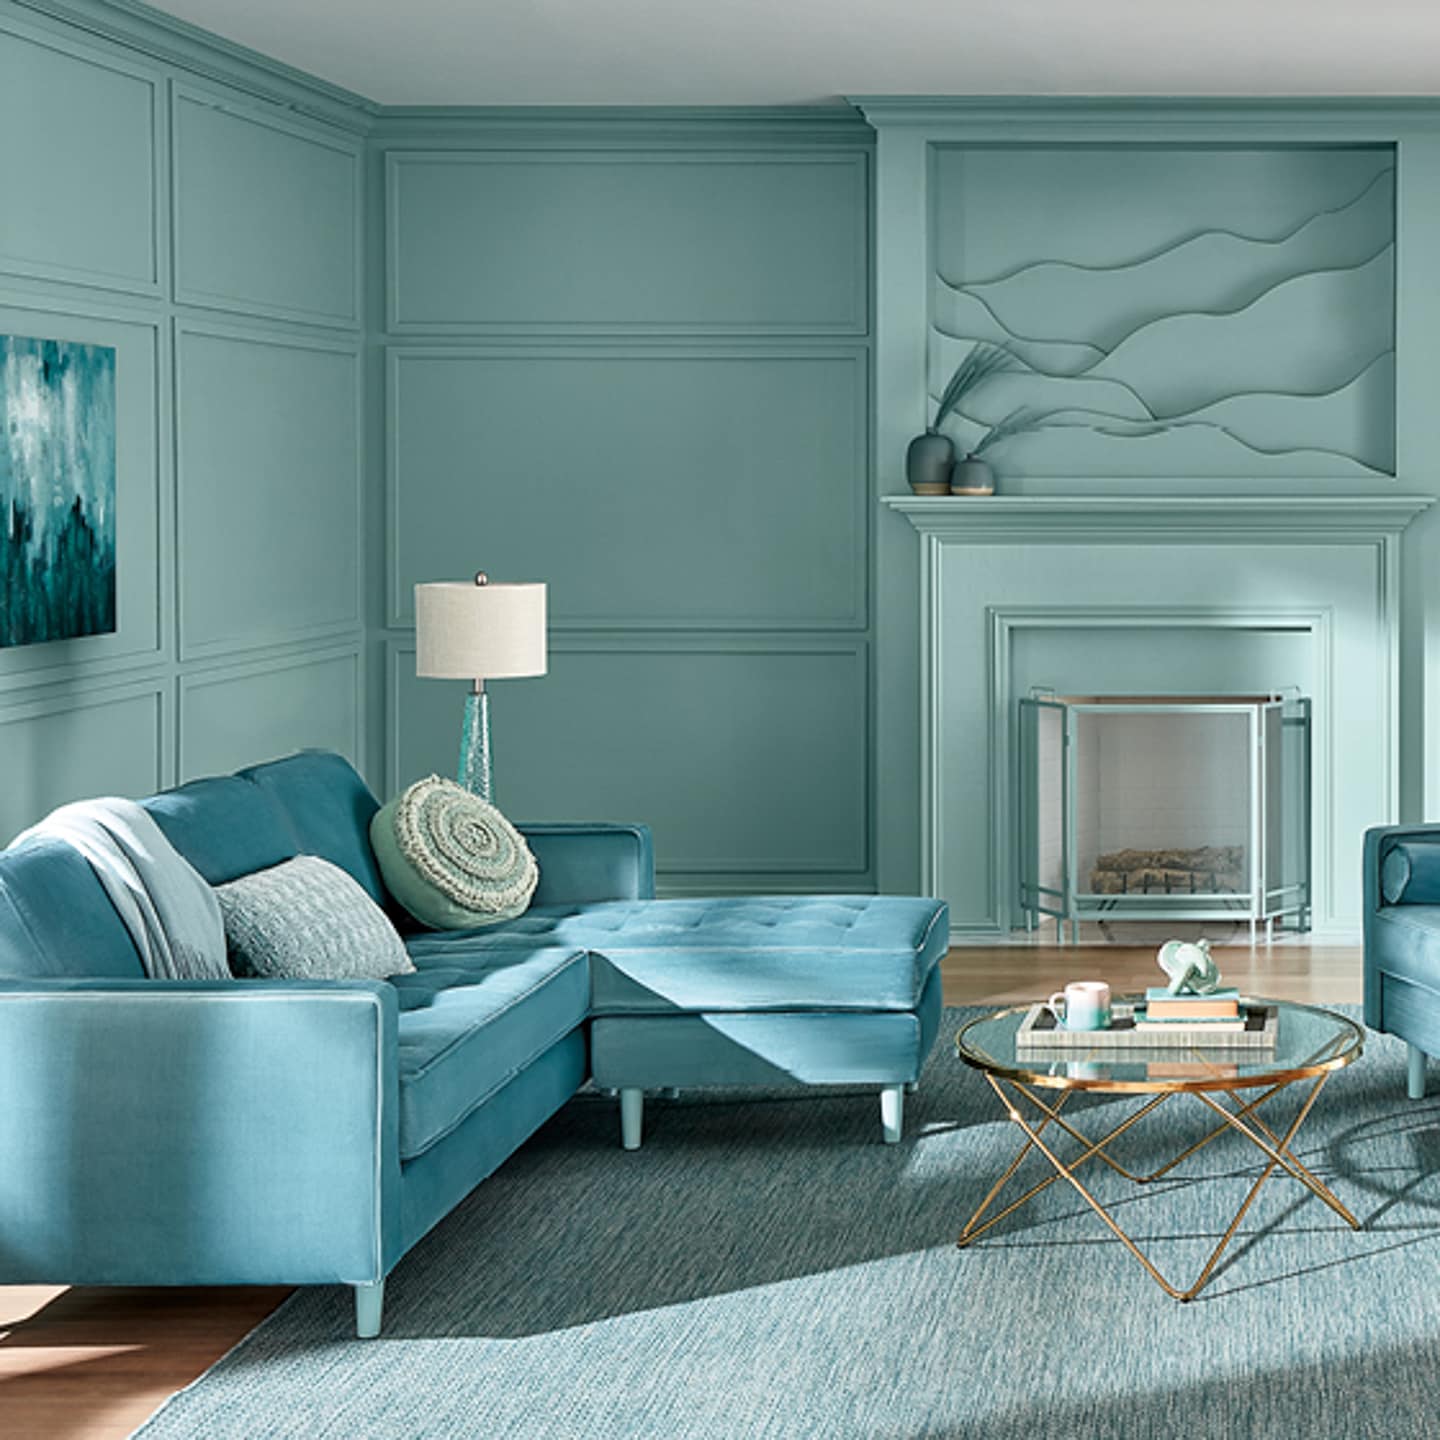 A living room painted in Valspar Renew Blue